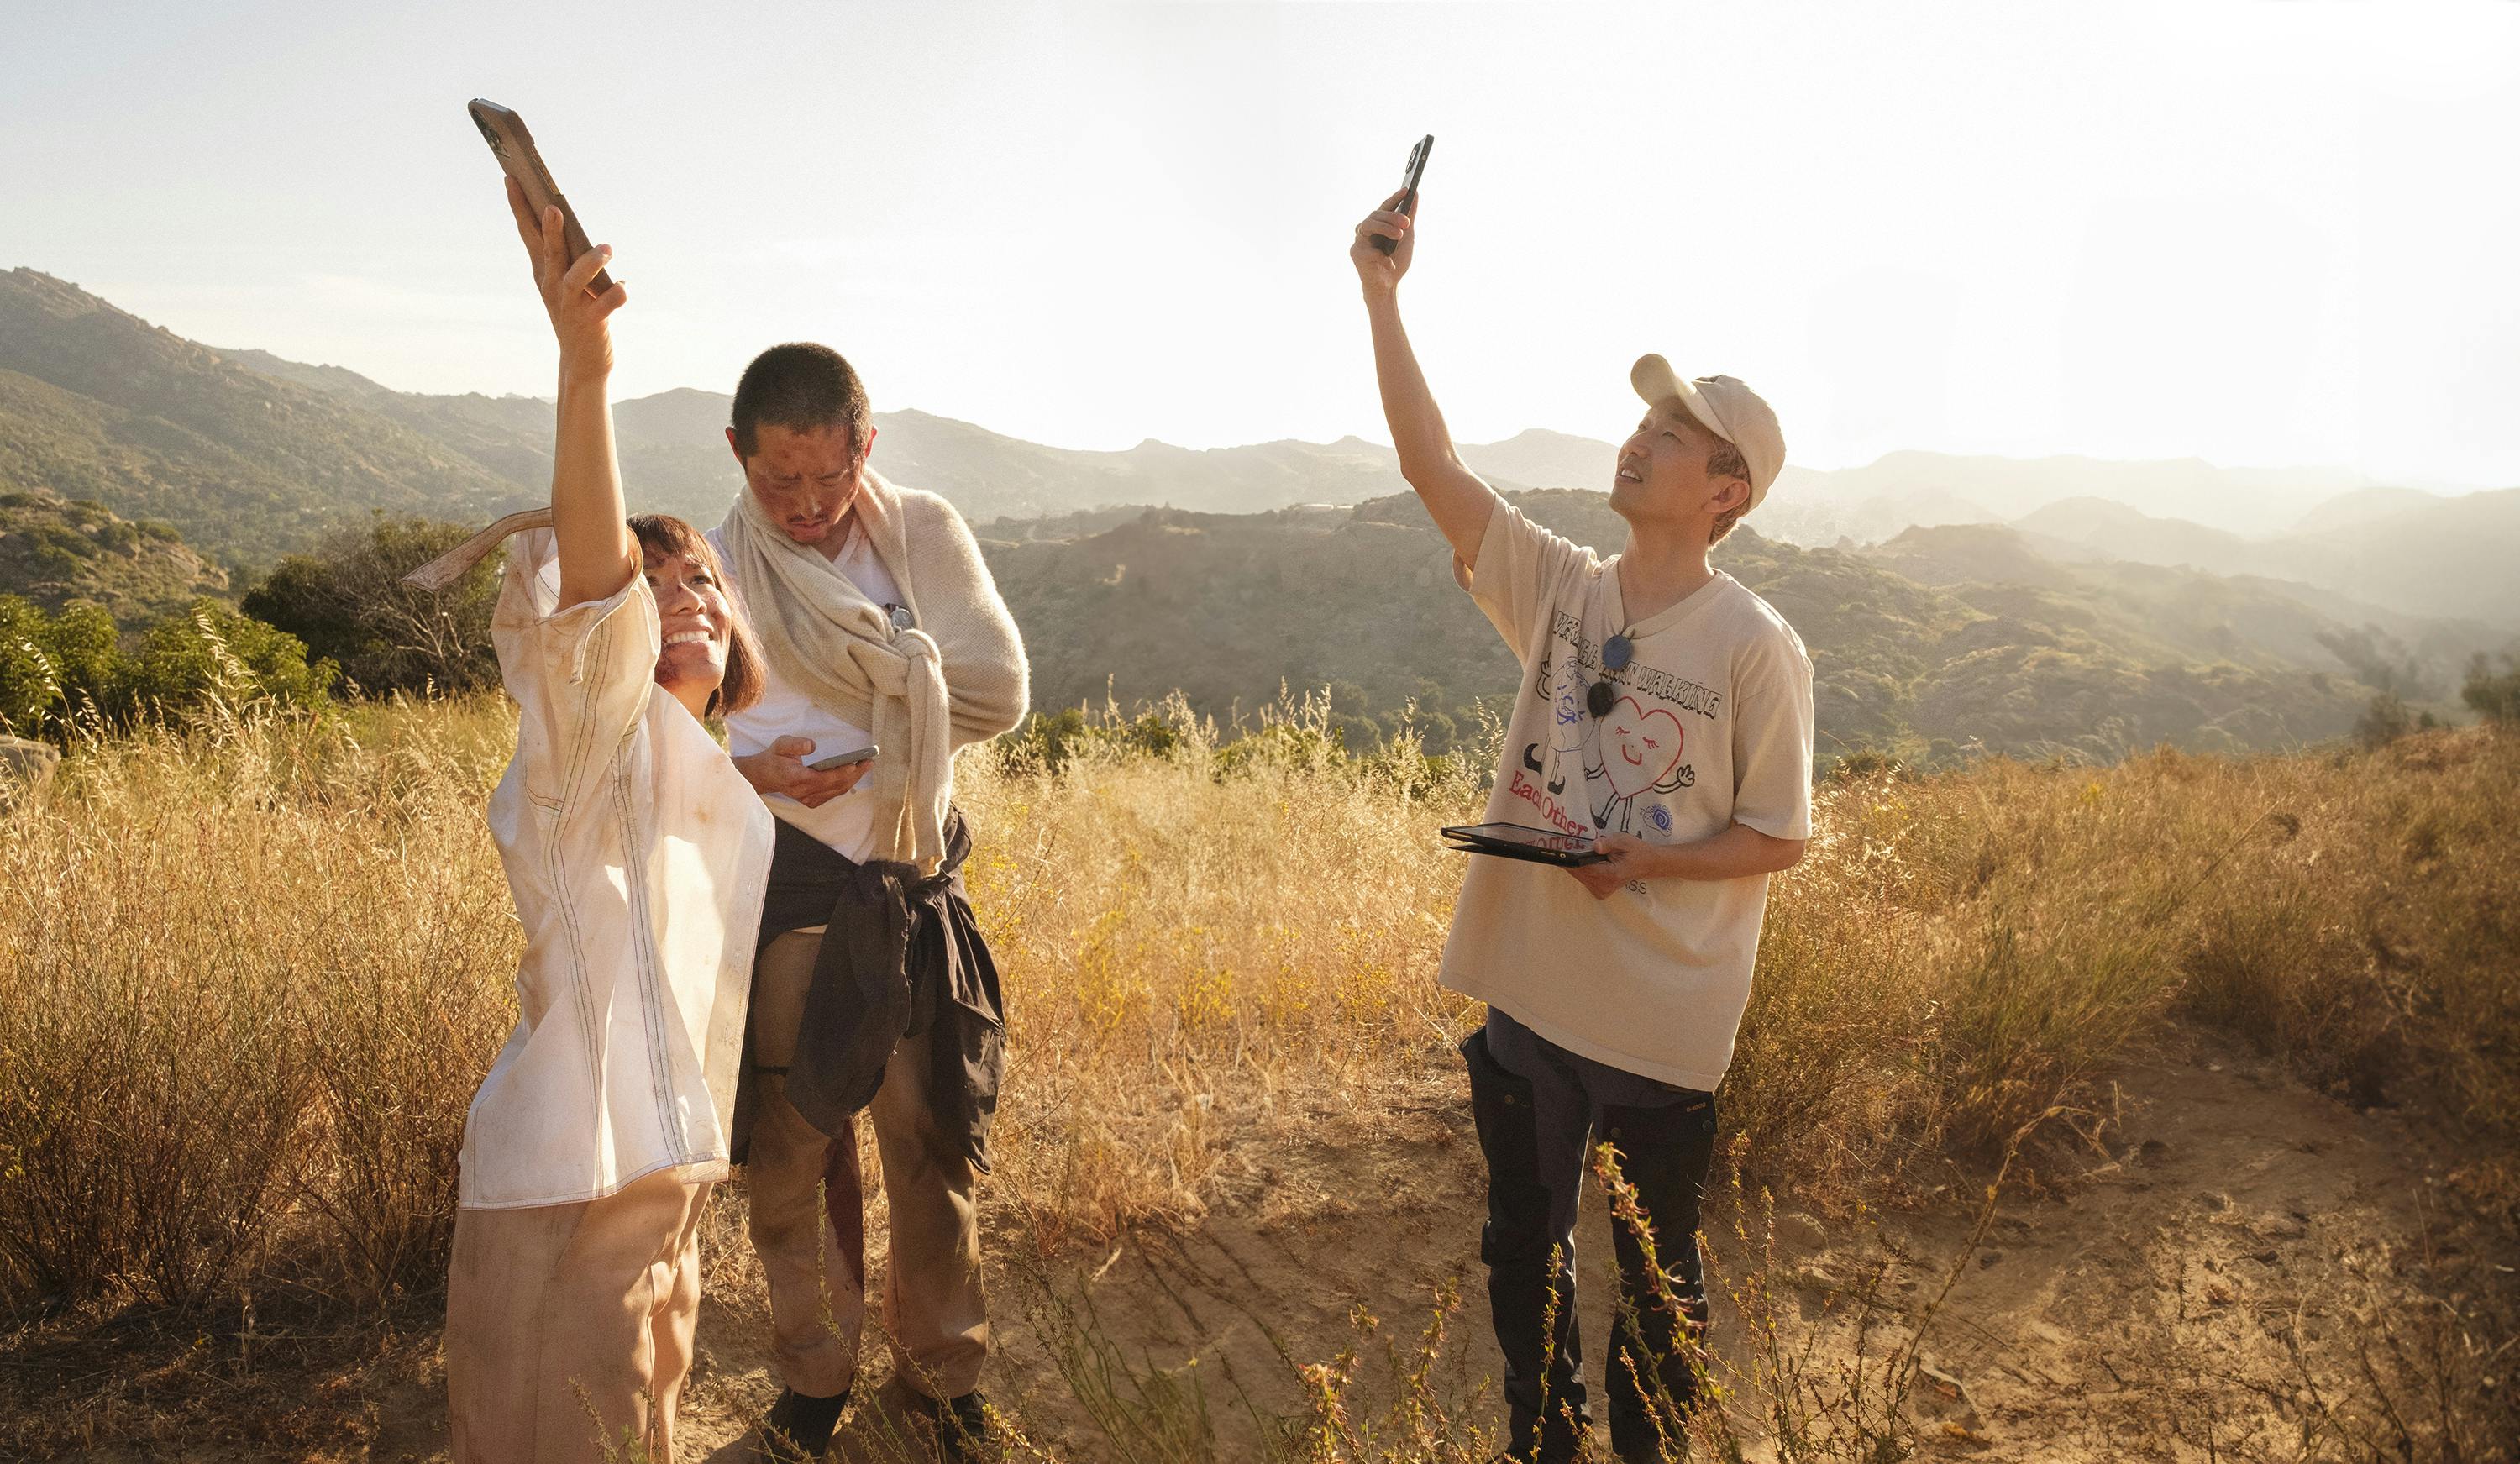 Ali Wong, Steven Yeun, and Lee Sung Jin stand in a sunny, dry field. They all wear white or beige shirts, and Lee and Wong raise phones to the sky. 